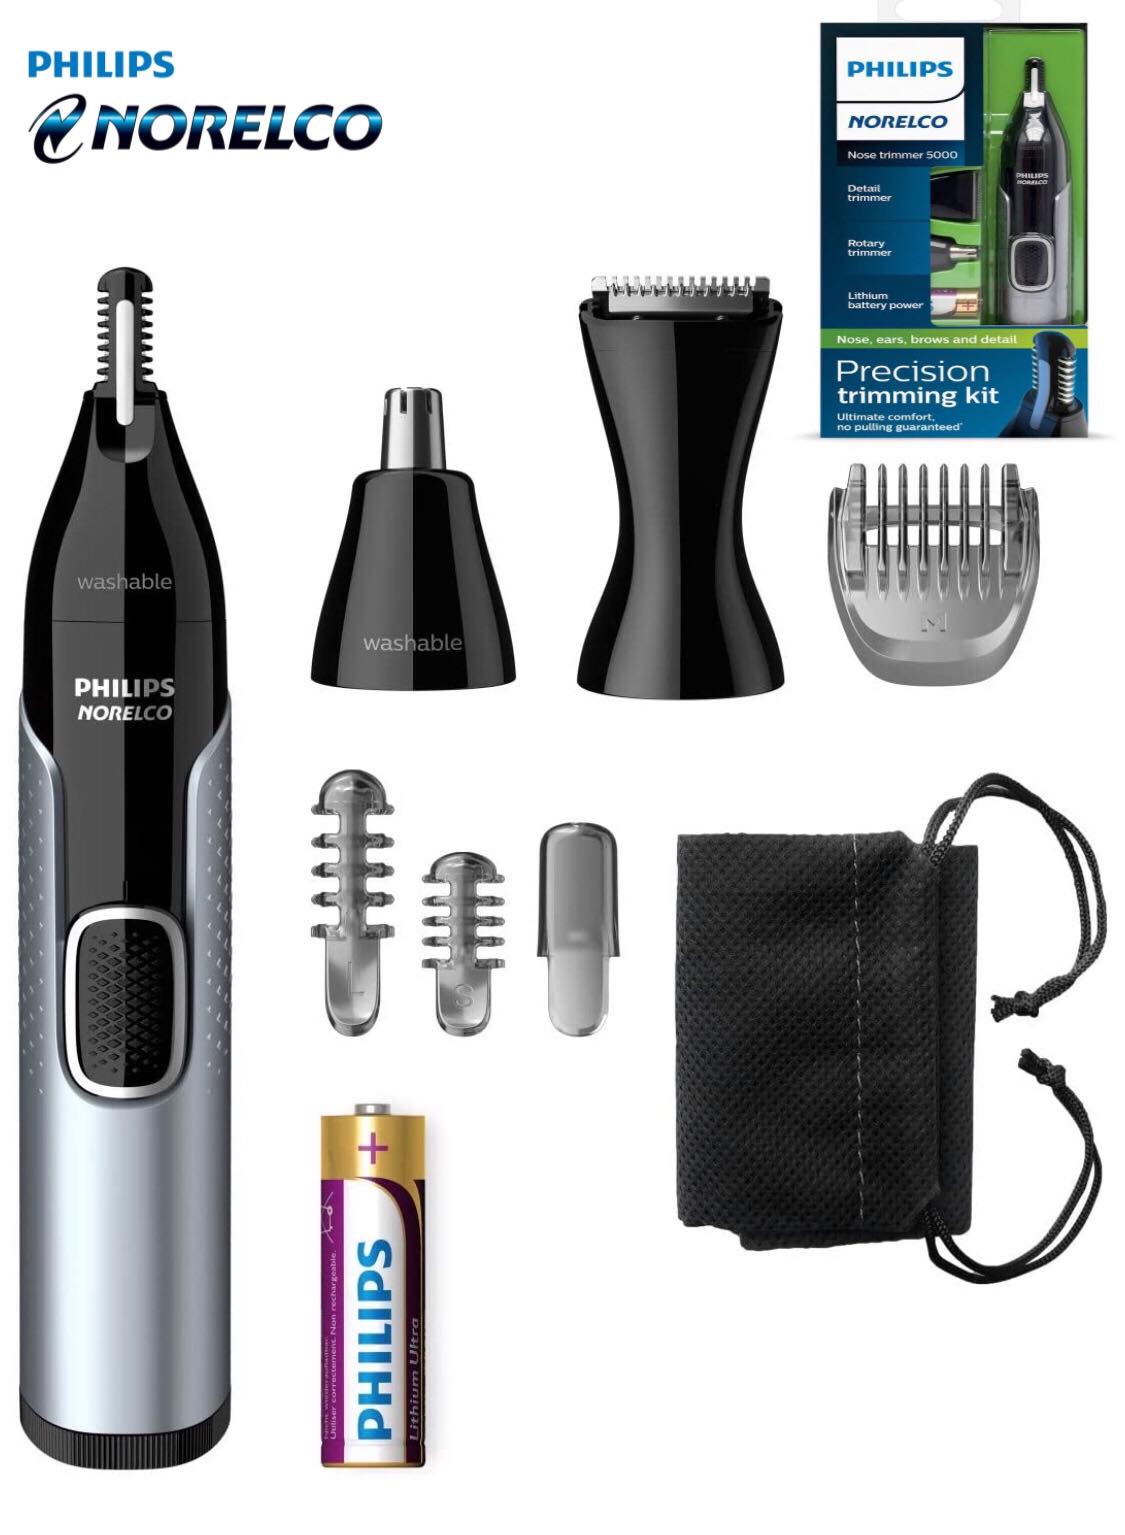 nose eyebrow and ear hair trimmer